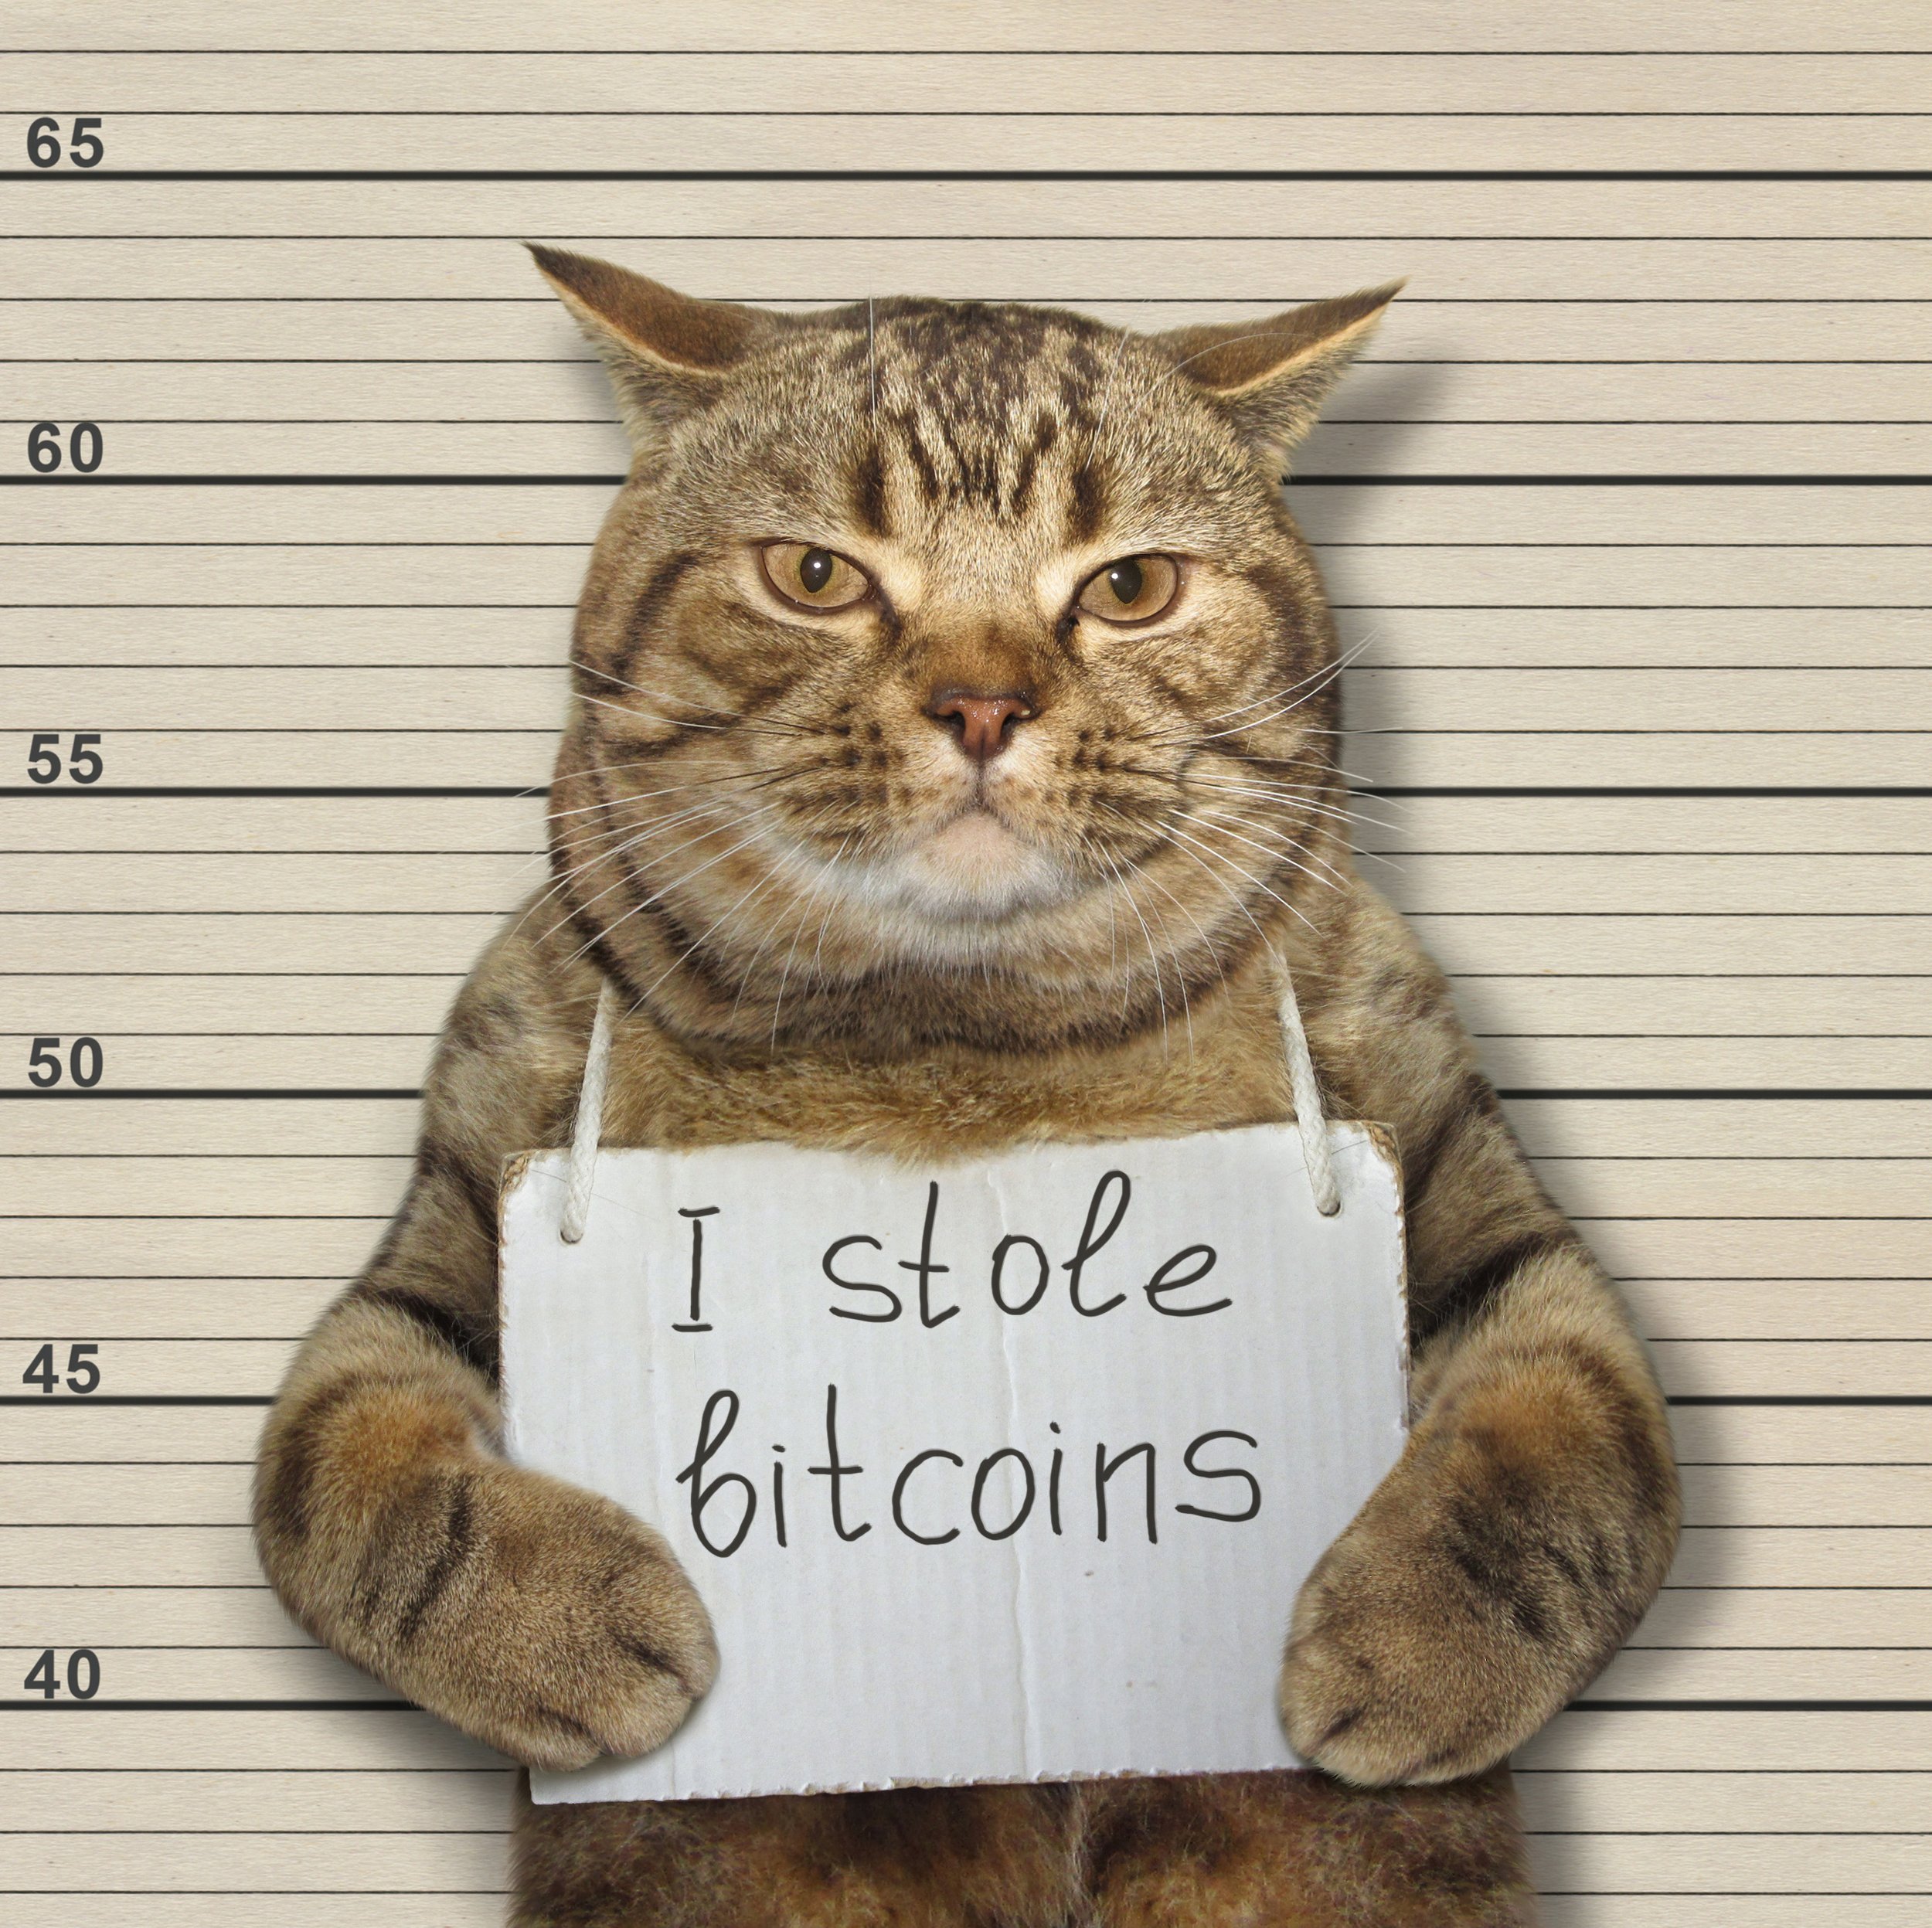 Cat Holding a sign such as would be seen in a mugshot that says I stole bitcoin